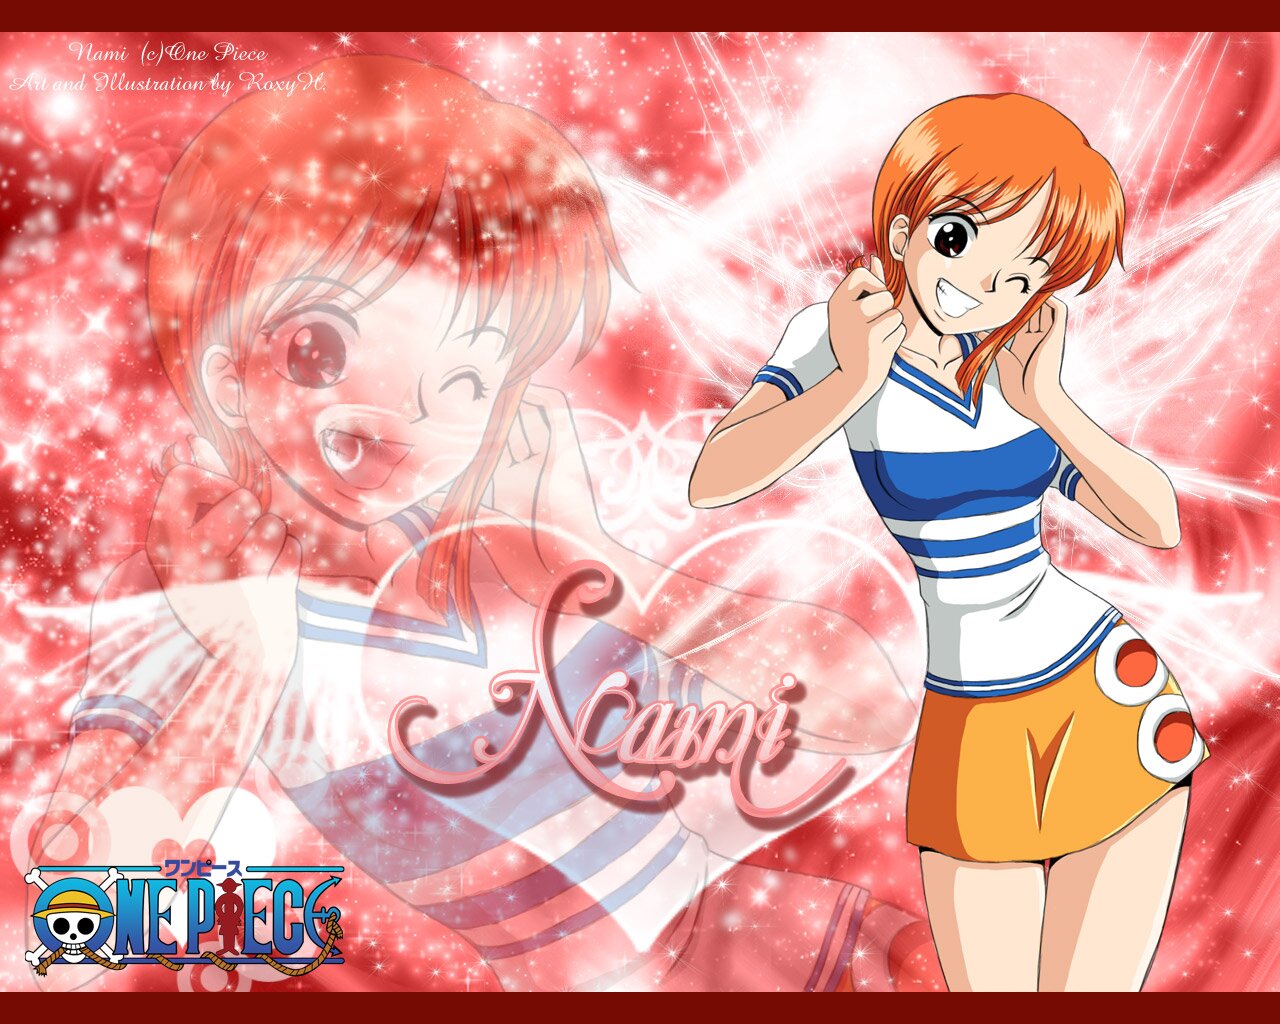 You are viewing the One Piece wallpaper named Nami.